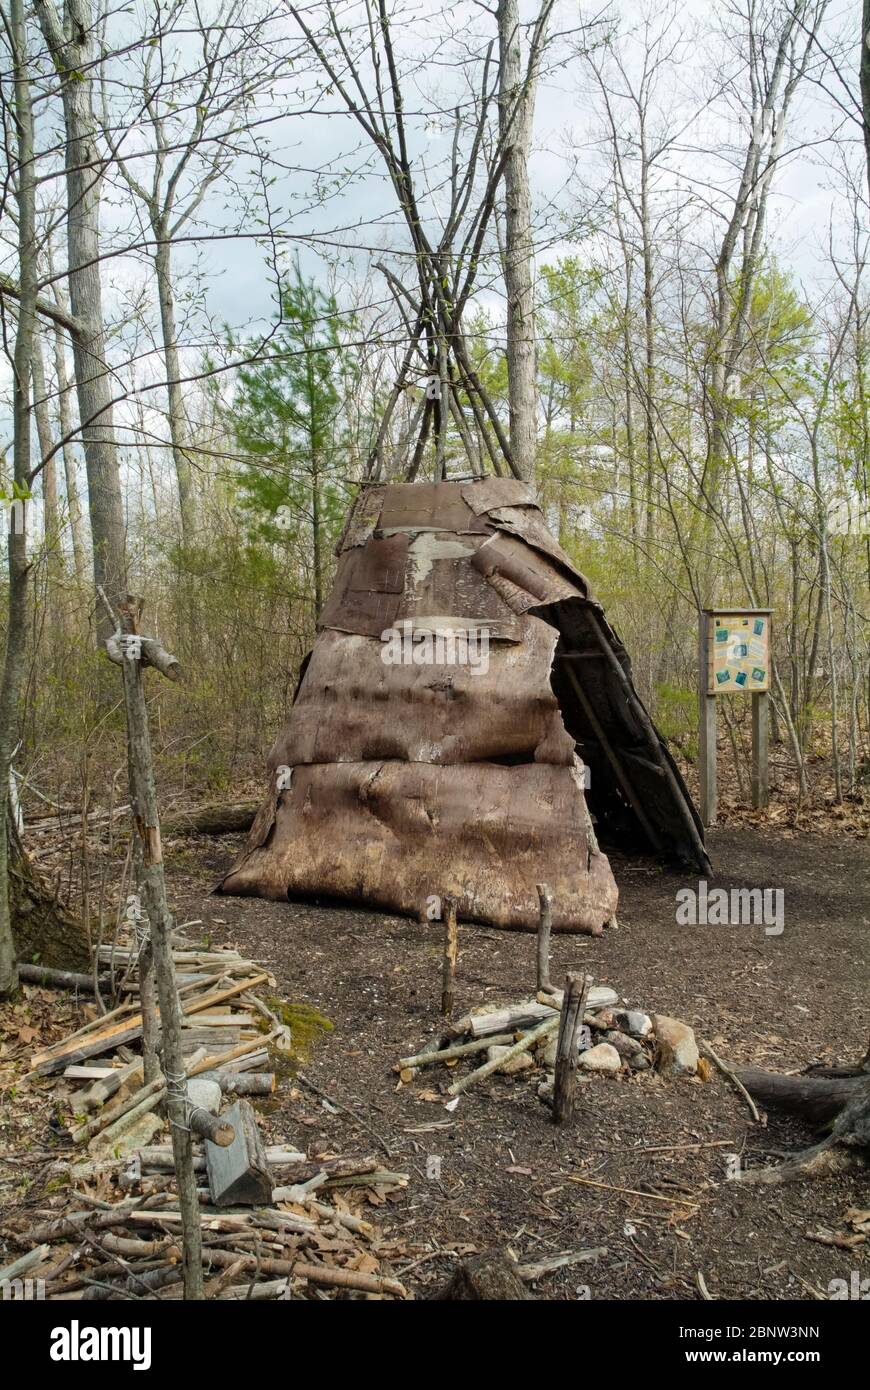 A wigwam at Sandy Point Discovery center in Stratham, New Hampshire. Wigwams are dome-shaped huts or tents that were used by Native American tribes. Stock Photo